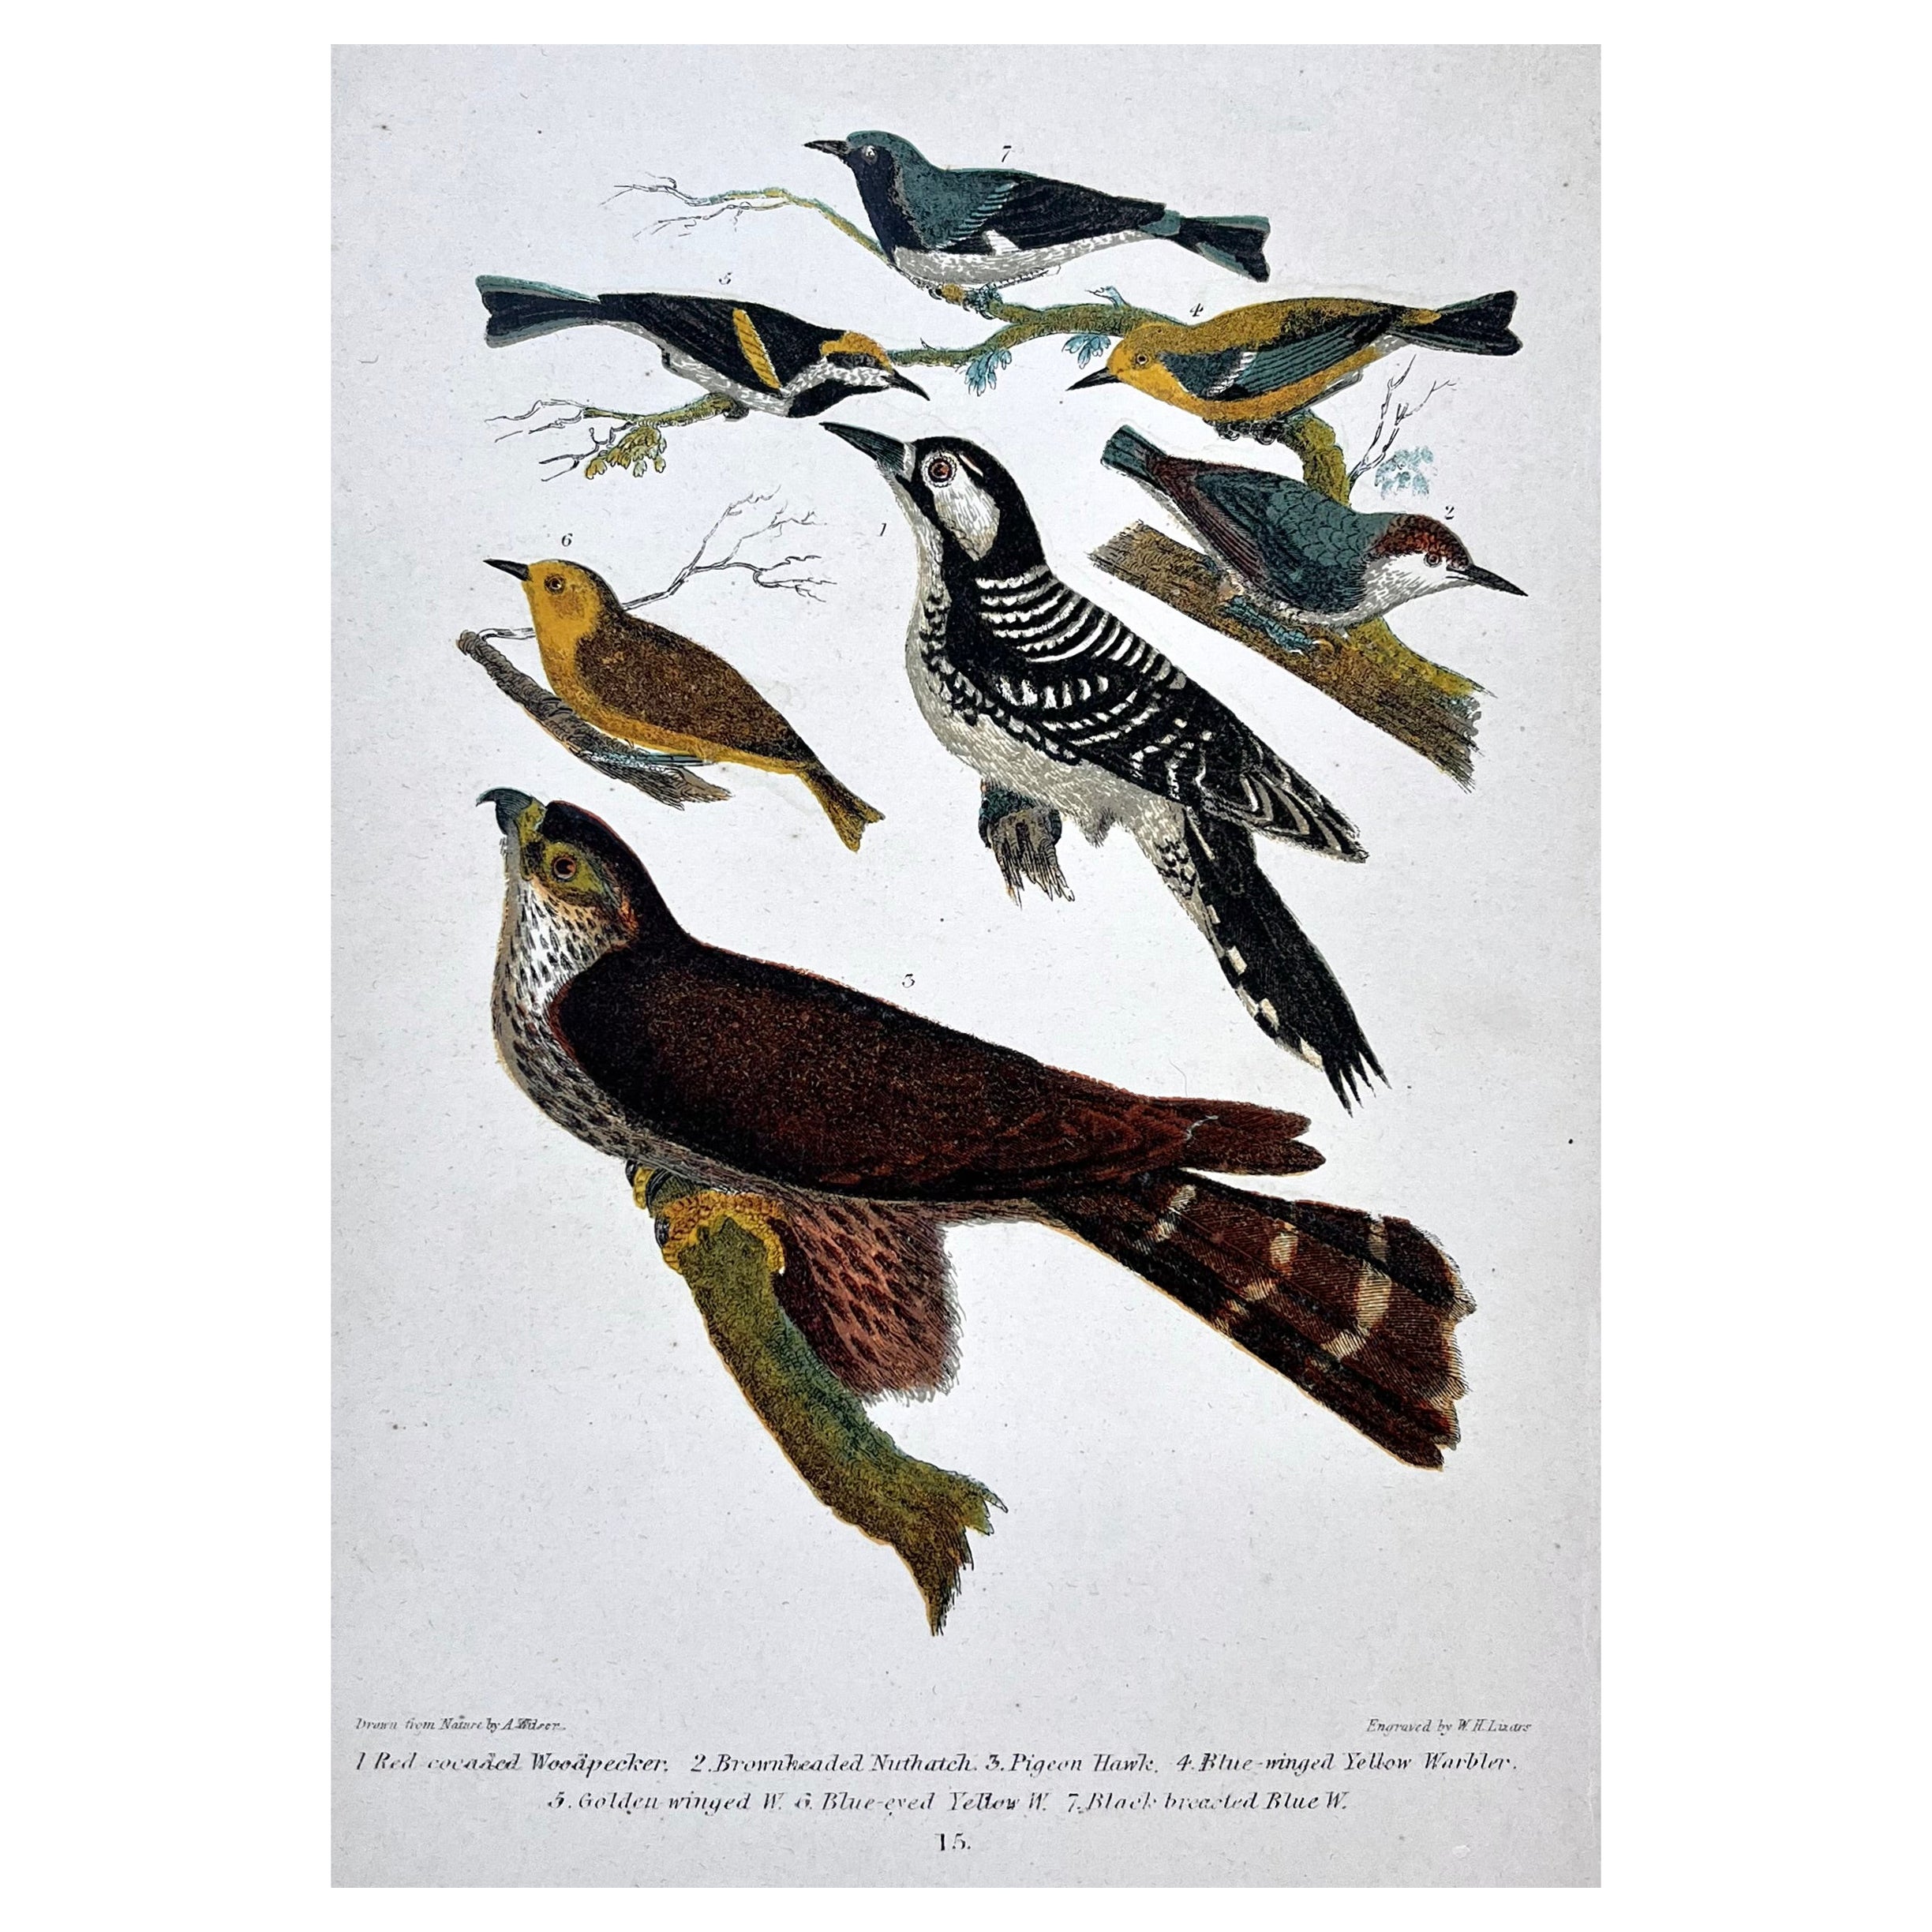 19th Century Alexander Wilson Print Woodpeckers & Warblers American Ornithology